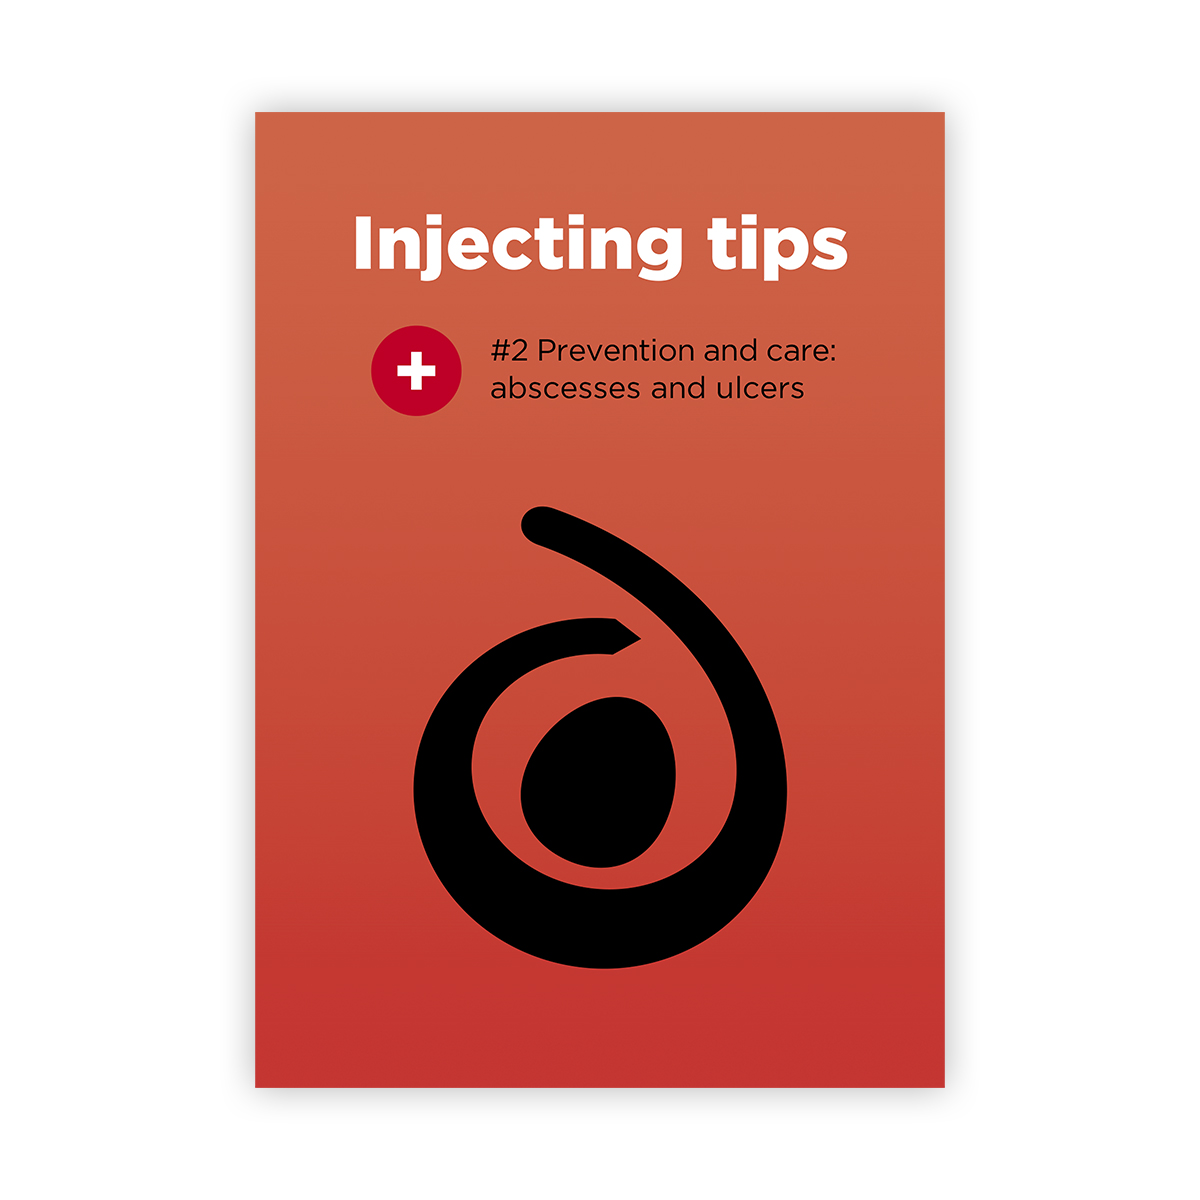 Injecting Tips #2 Prevention and care: abscesses and ulcers